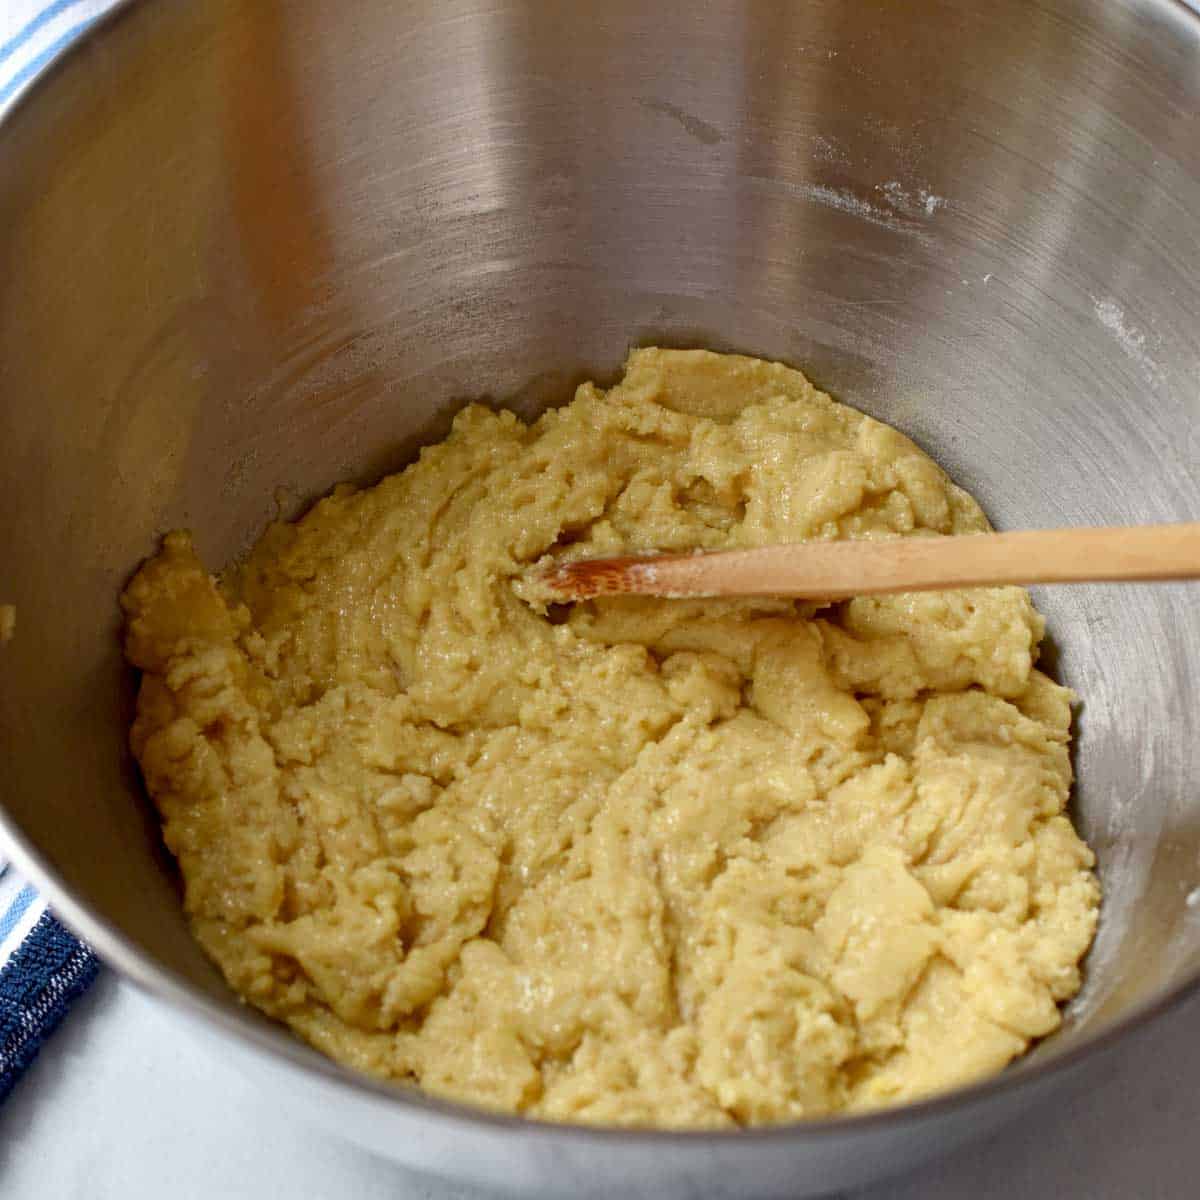 Batter for gluten free banana cake before adding the bananas and a wooden spoon in a large mixing bowl.